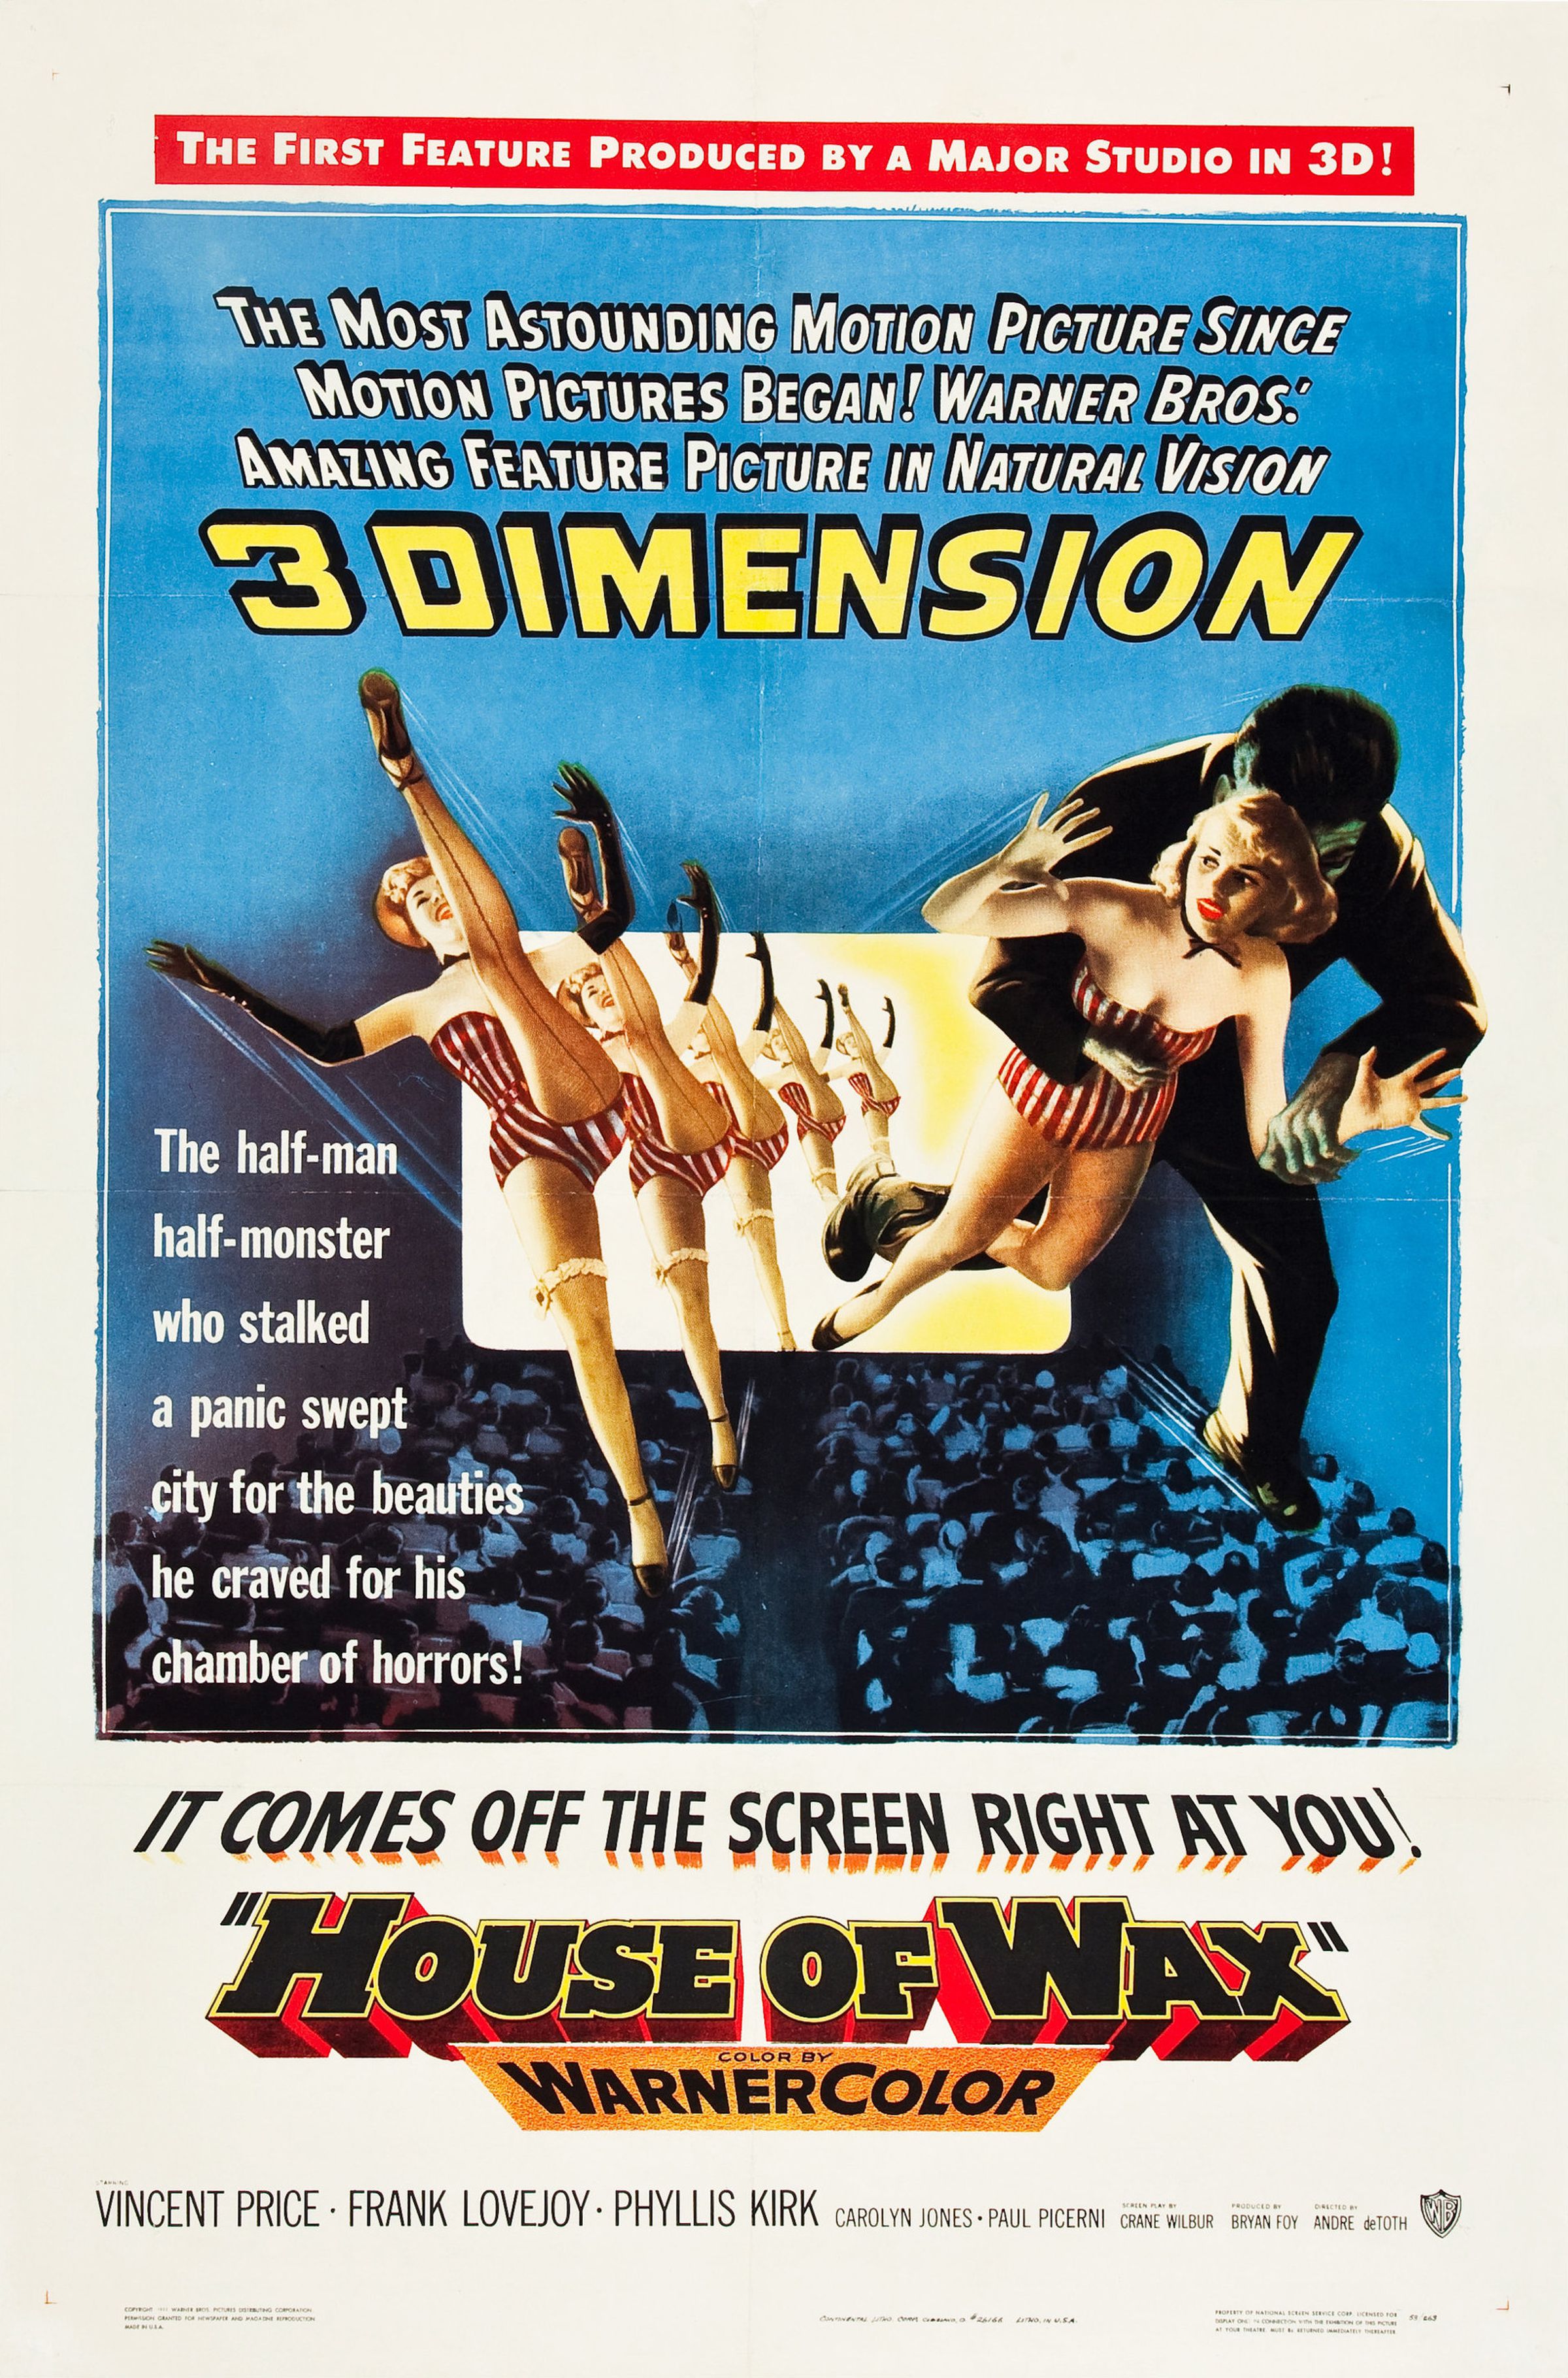 Poster for House of Wax announcing it’s in “3 Dimension” with chorus girls, one being kidnapped